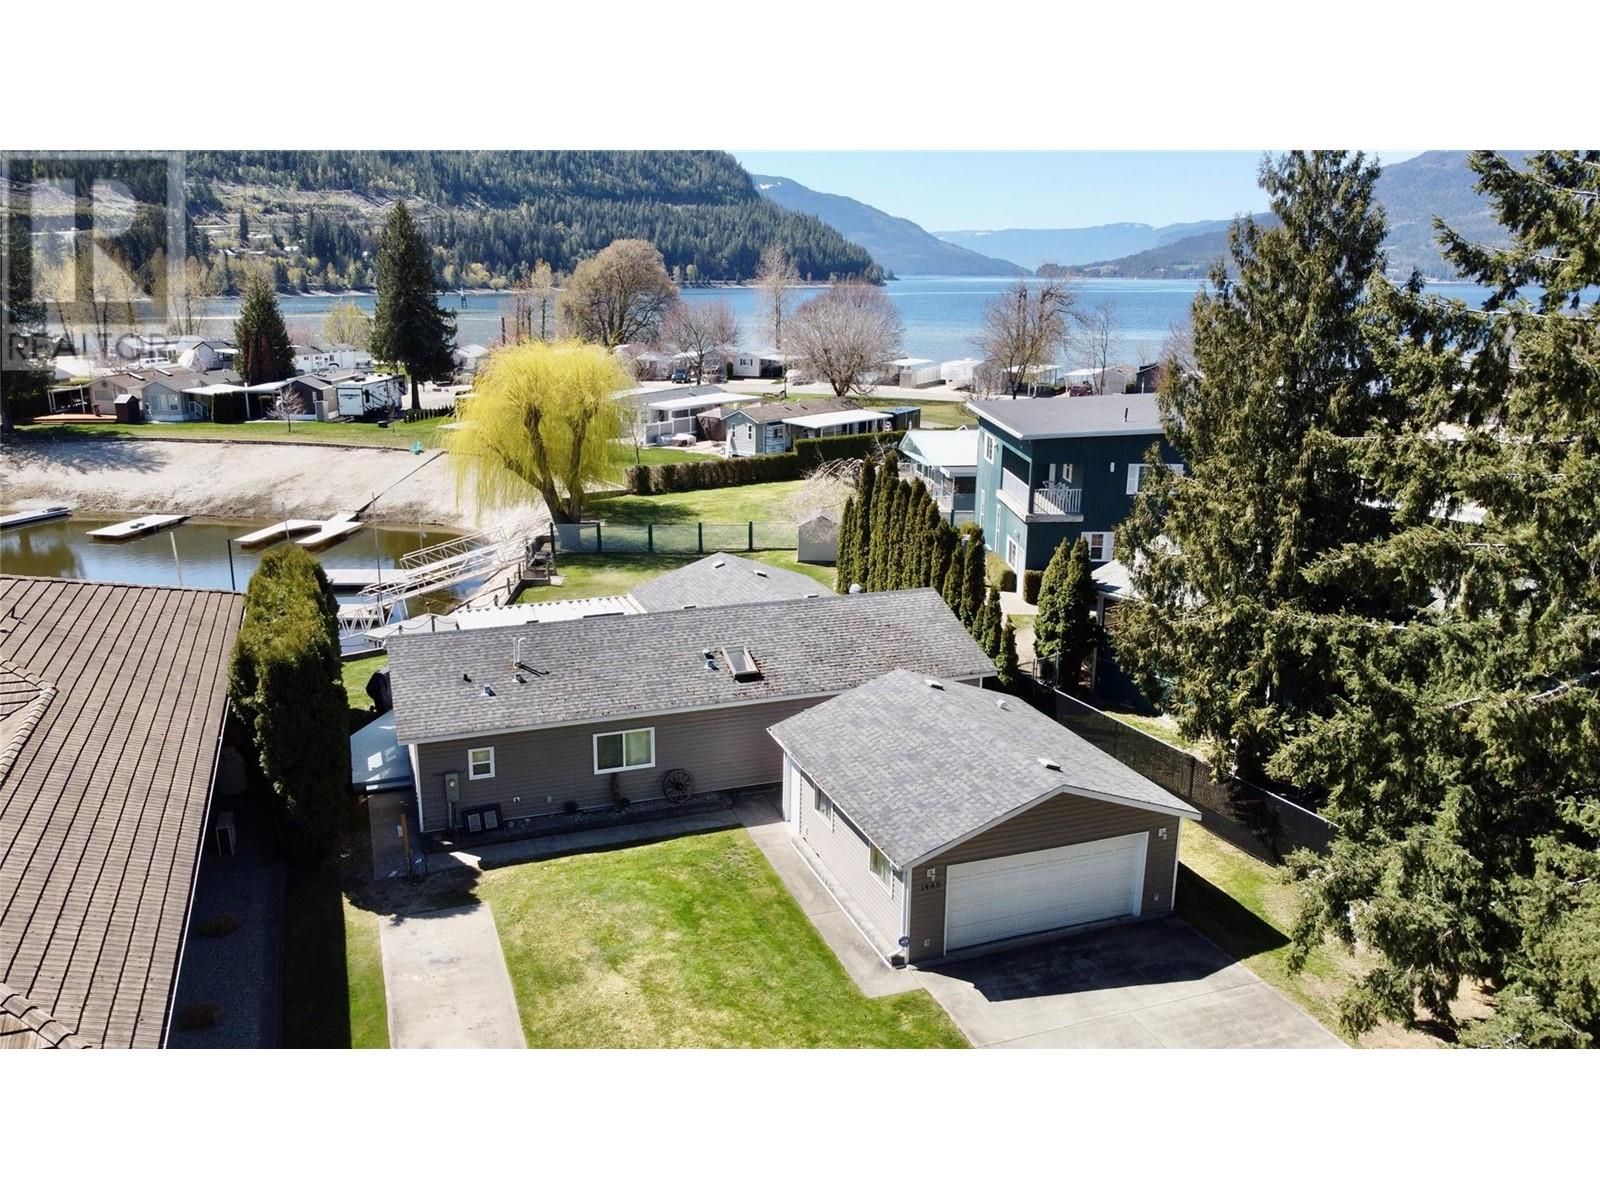 New property listed in Sicamous